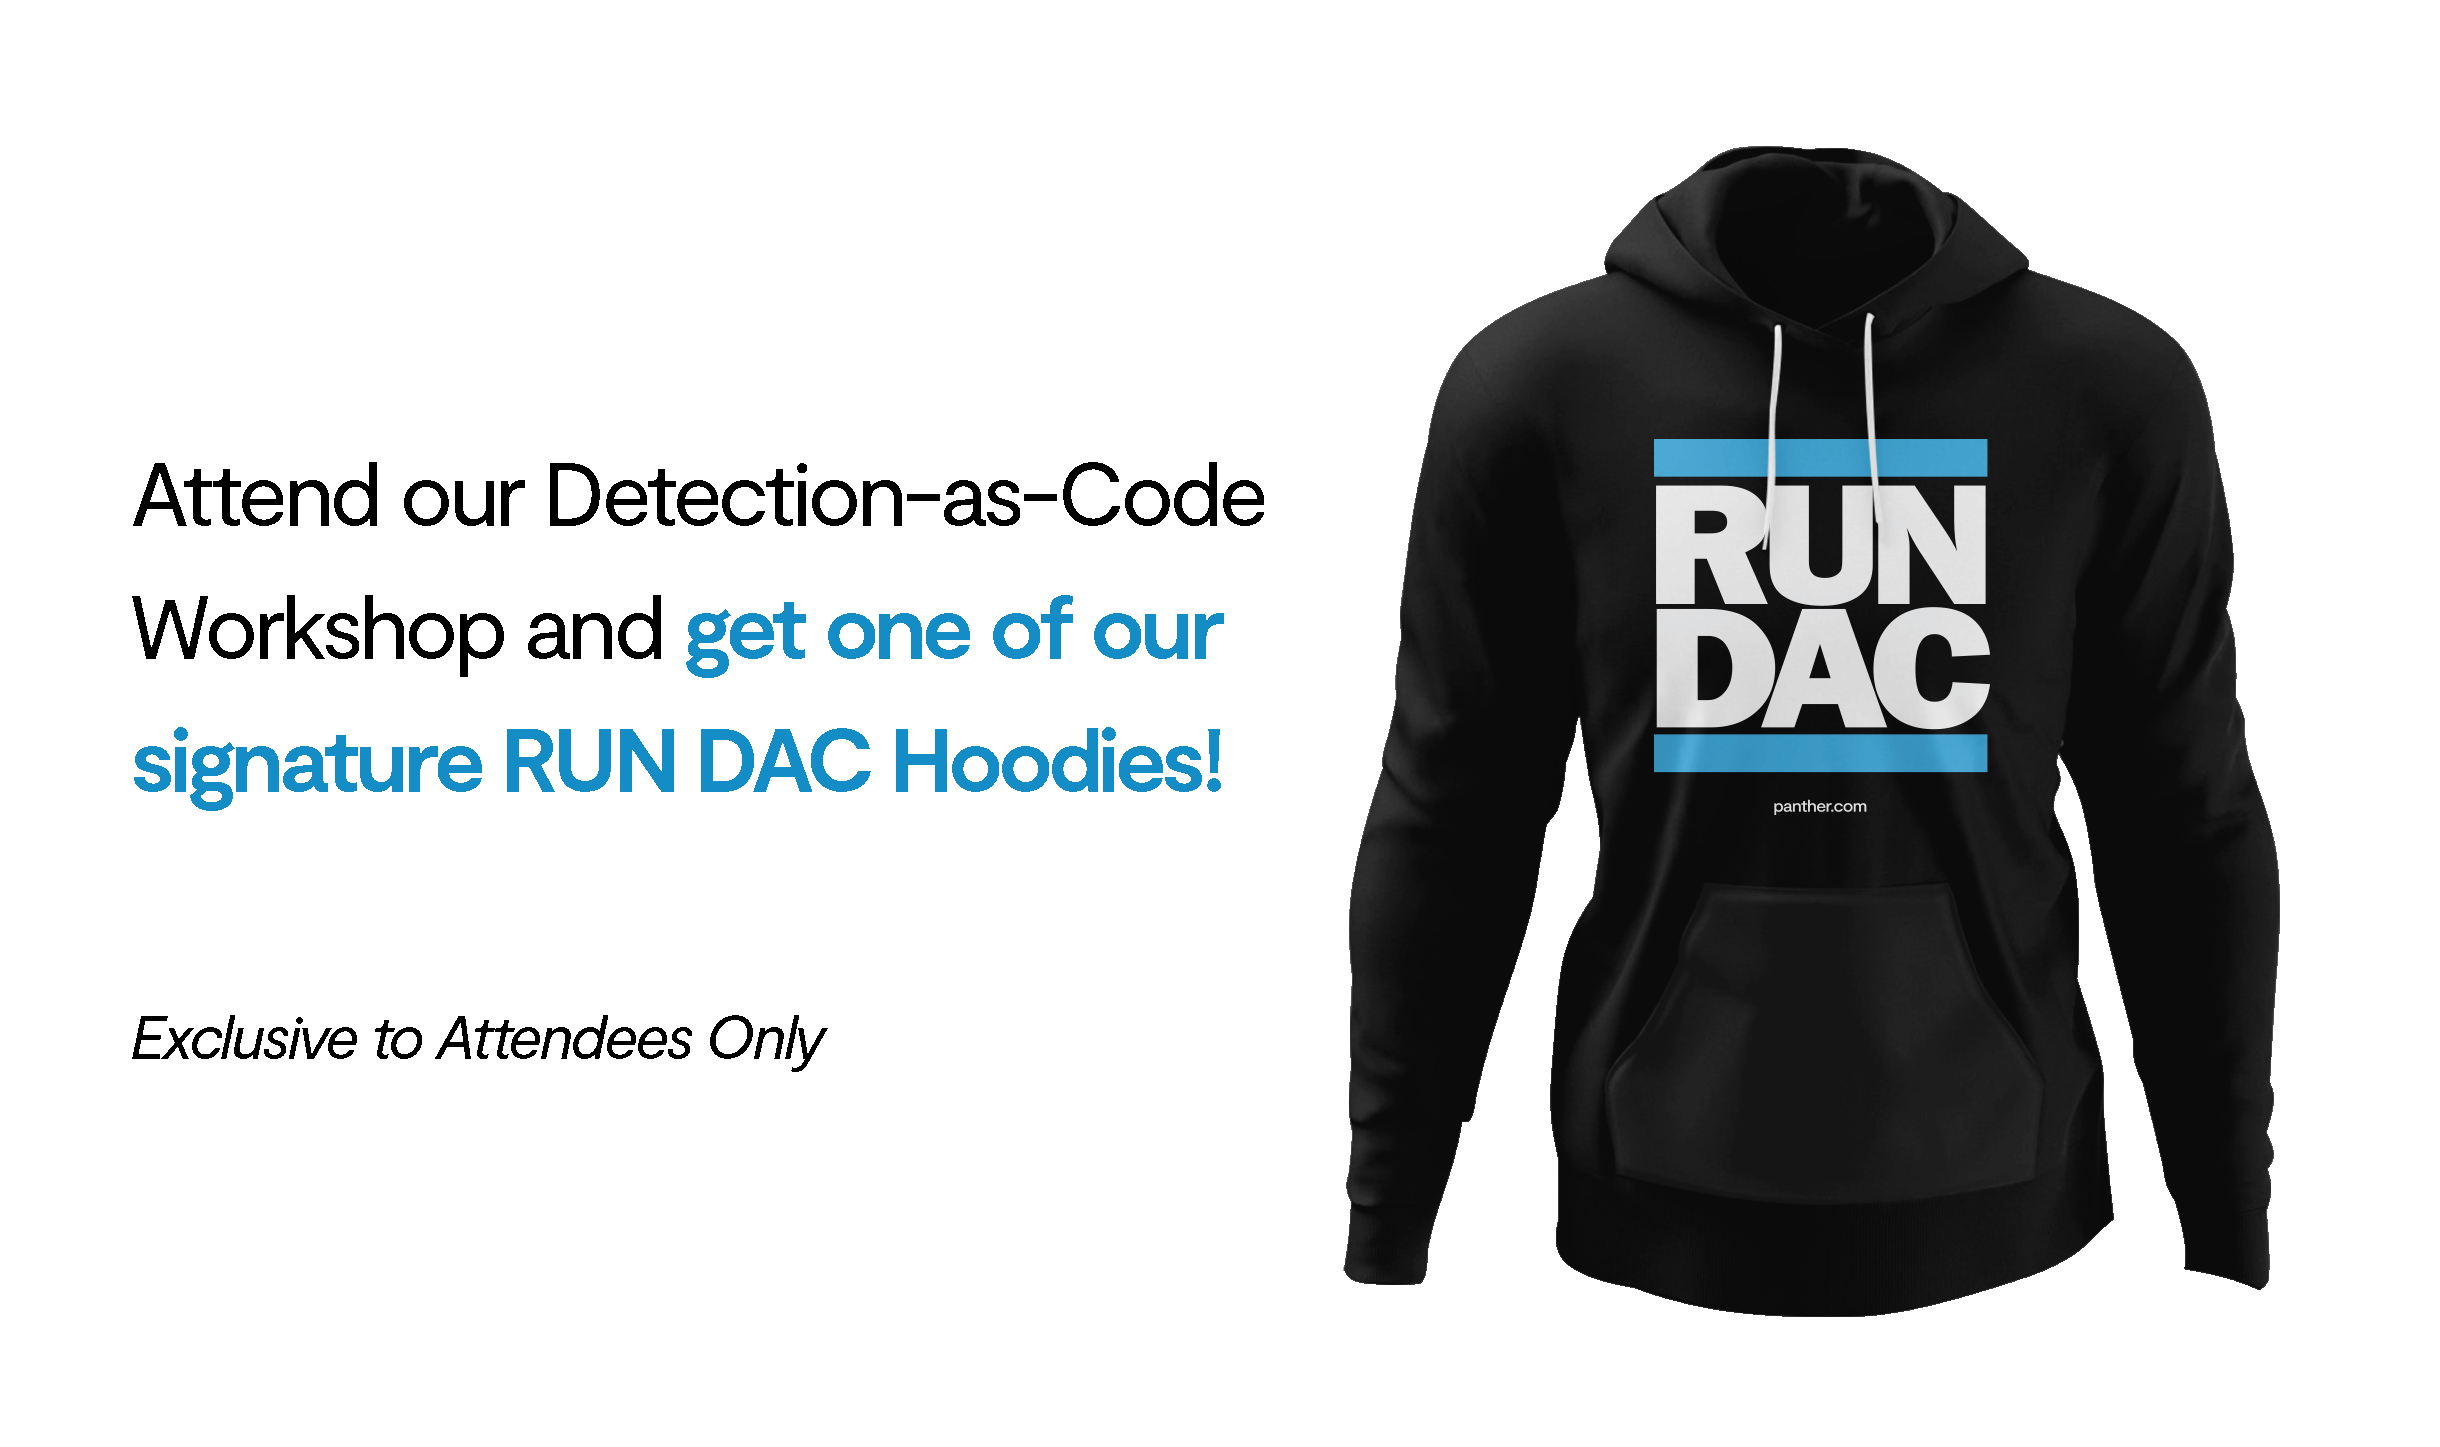 Attend our Detection-as-Code Workshop and get one of our signature RUN DAC Hoodies - Exclusive to Attendees Only